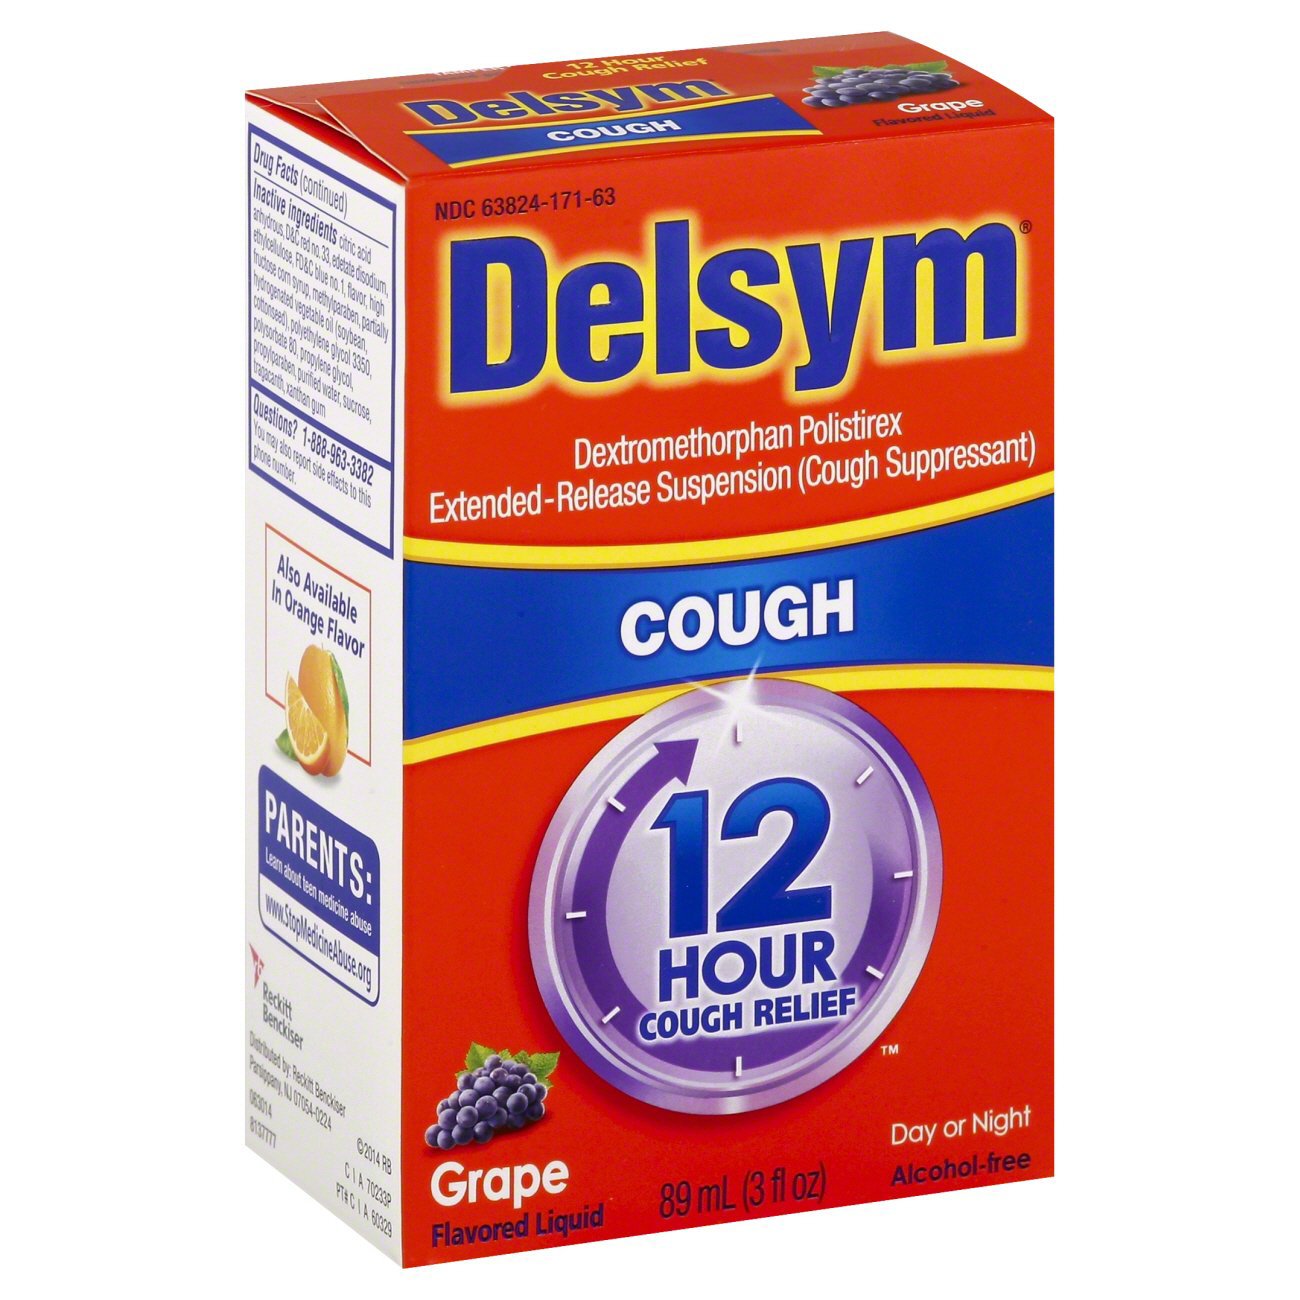 Cold and Cough Relief Delsym® 30 mg / 5 mL Strength Liquid 3 oz.